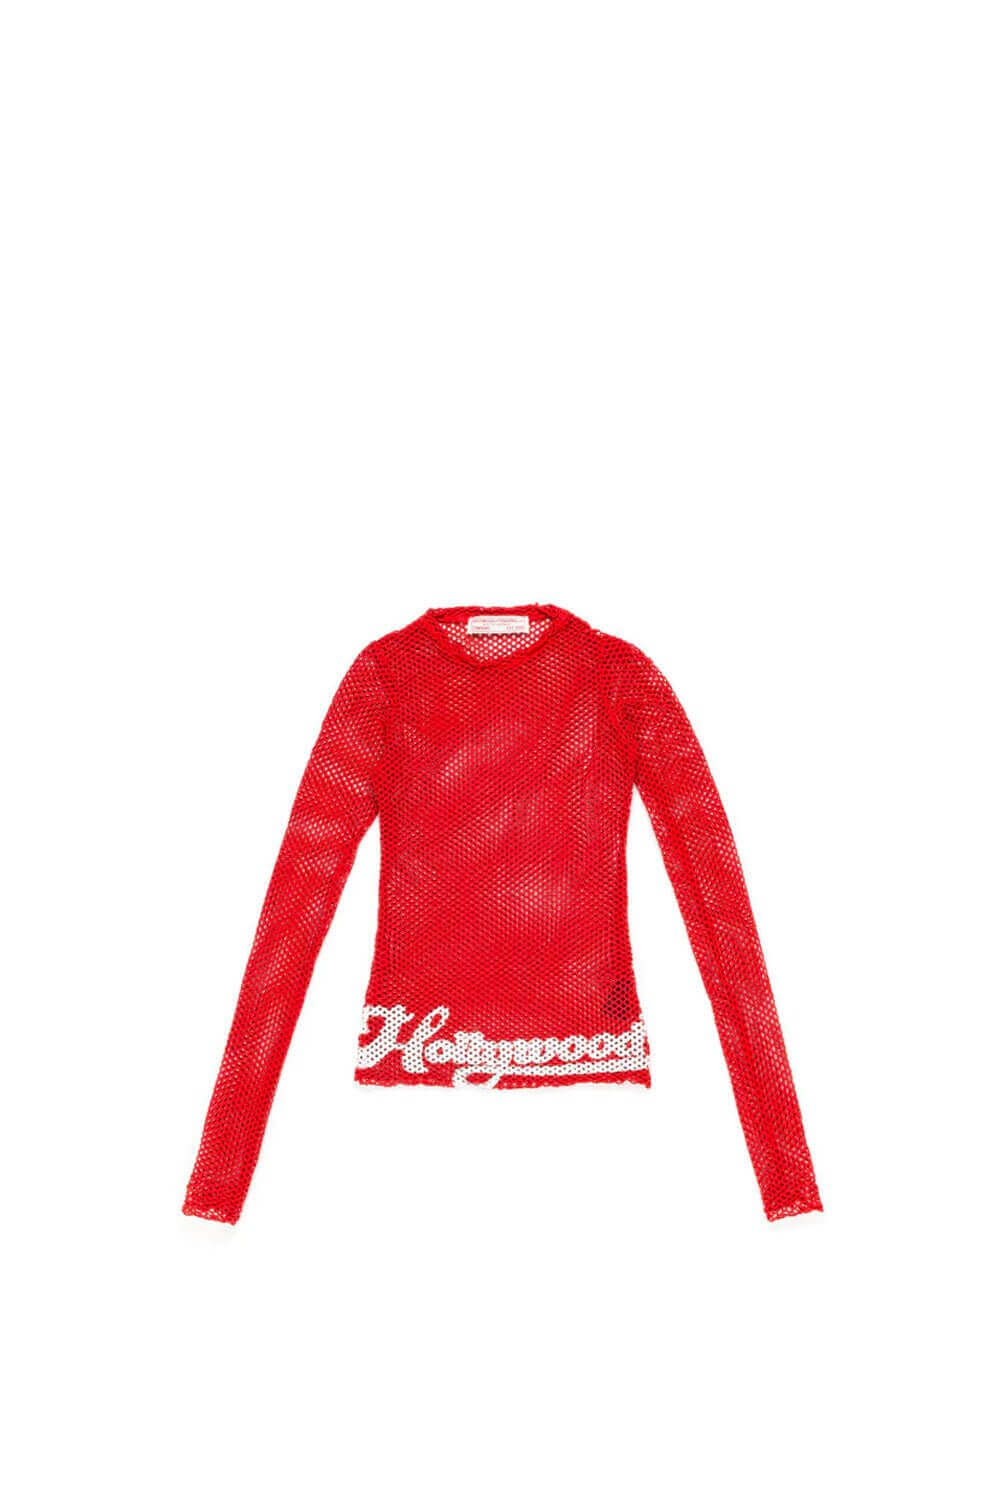 HOLLY MESH - REG Net long sleeve t-shirt. Hollywood print on the front. Composition: 96% Cotton 4% Elastane HTC LOS ANGELES